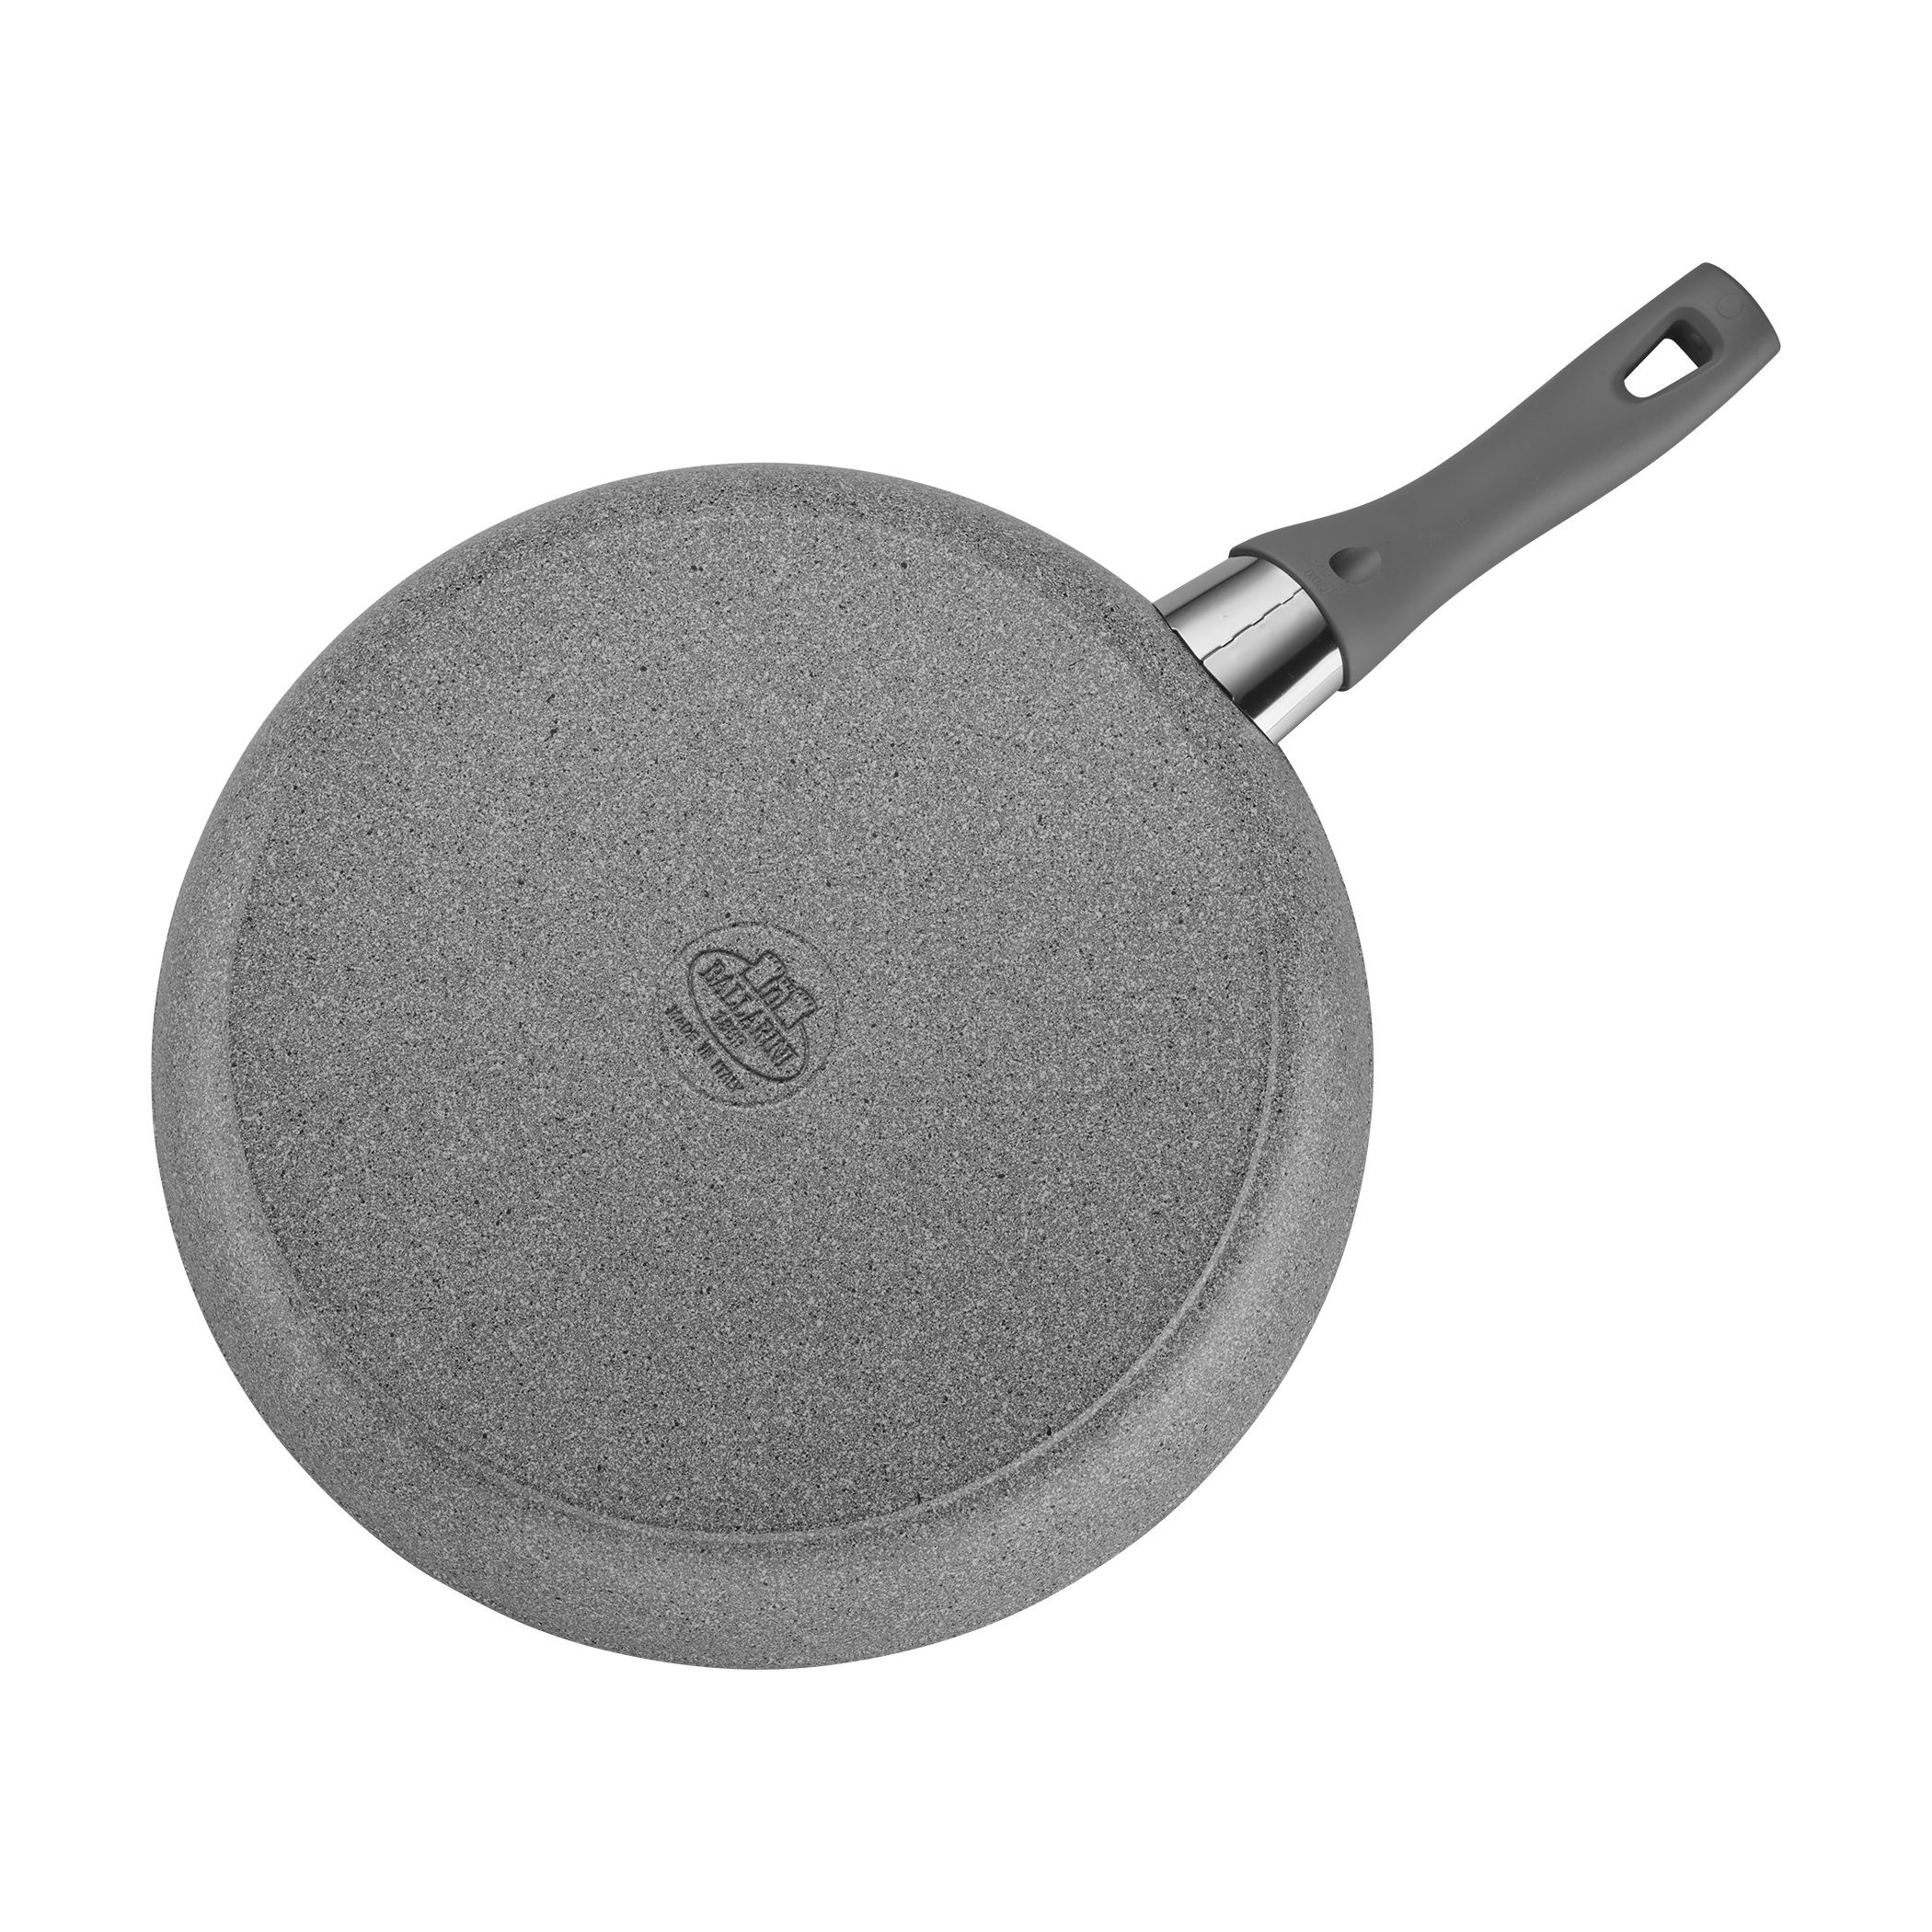 Belk 12 Inch Ultra-Durable Mineral and Iinfused Fry Pan